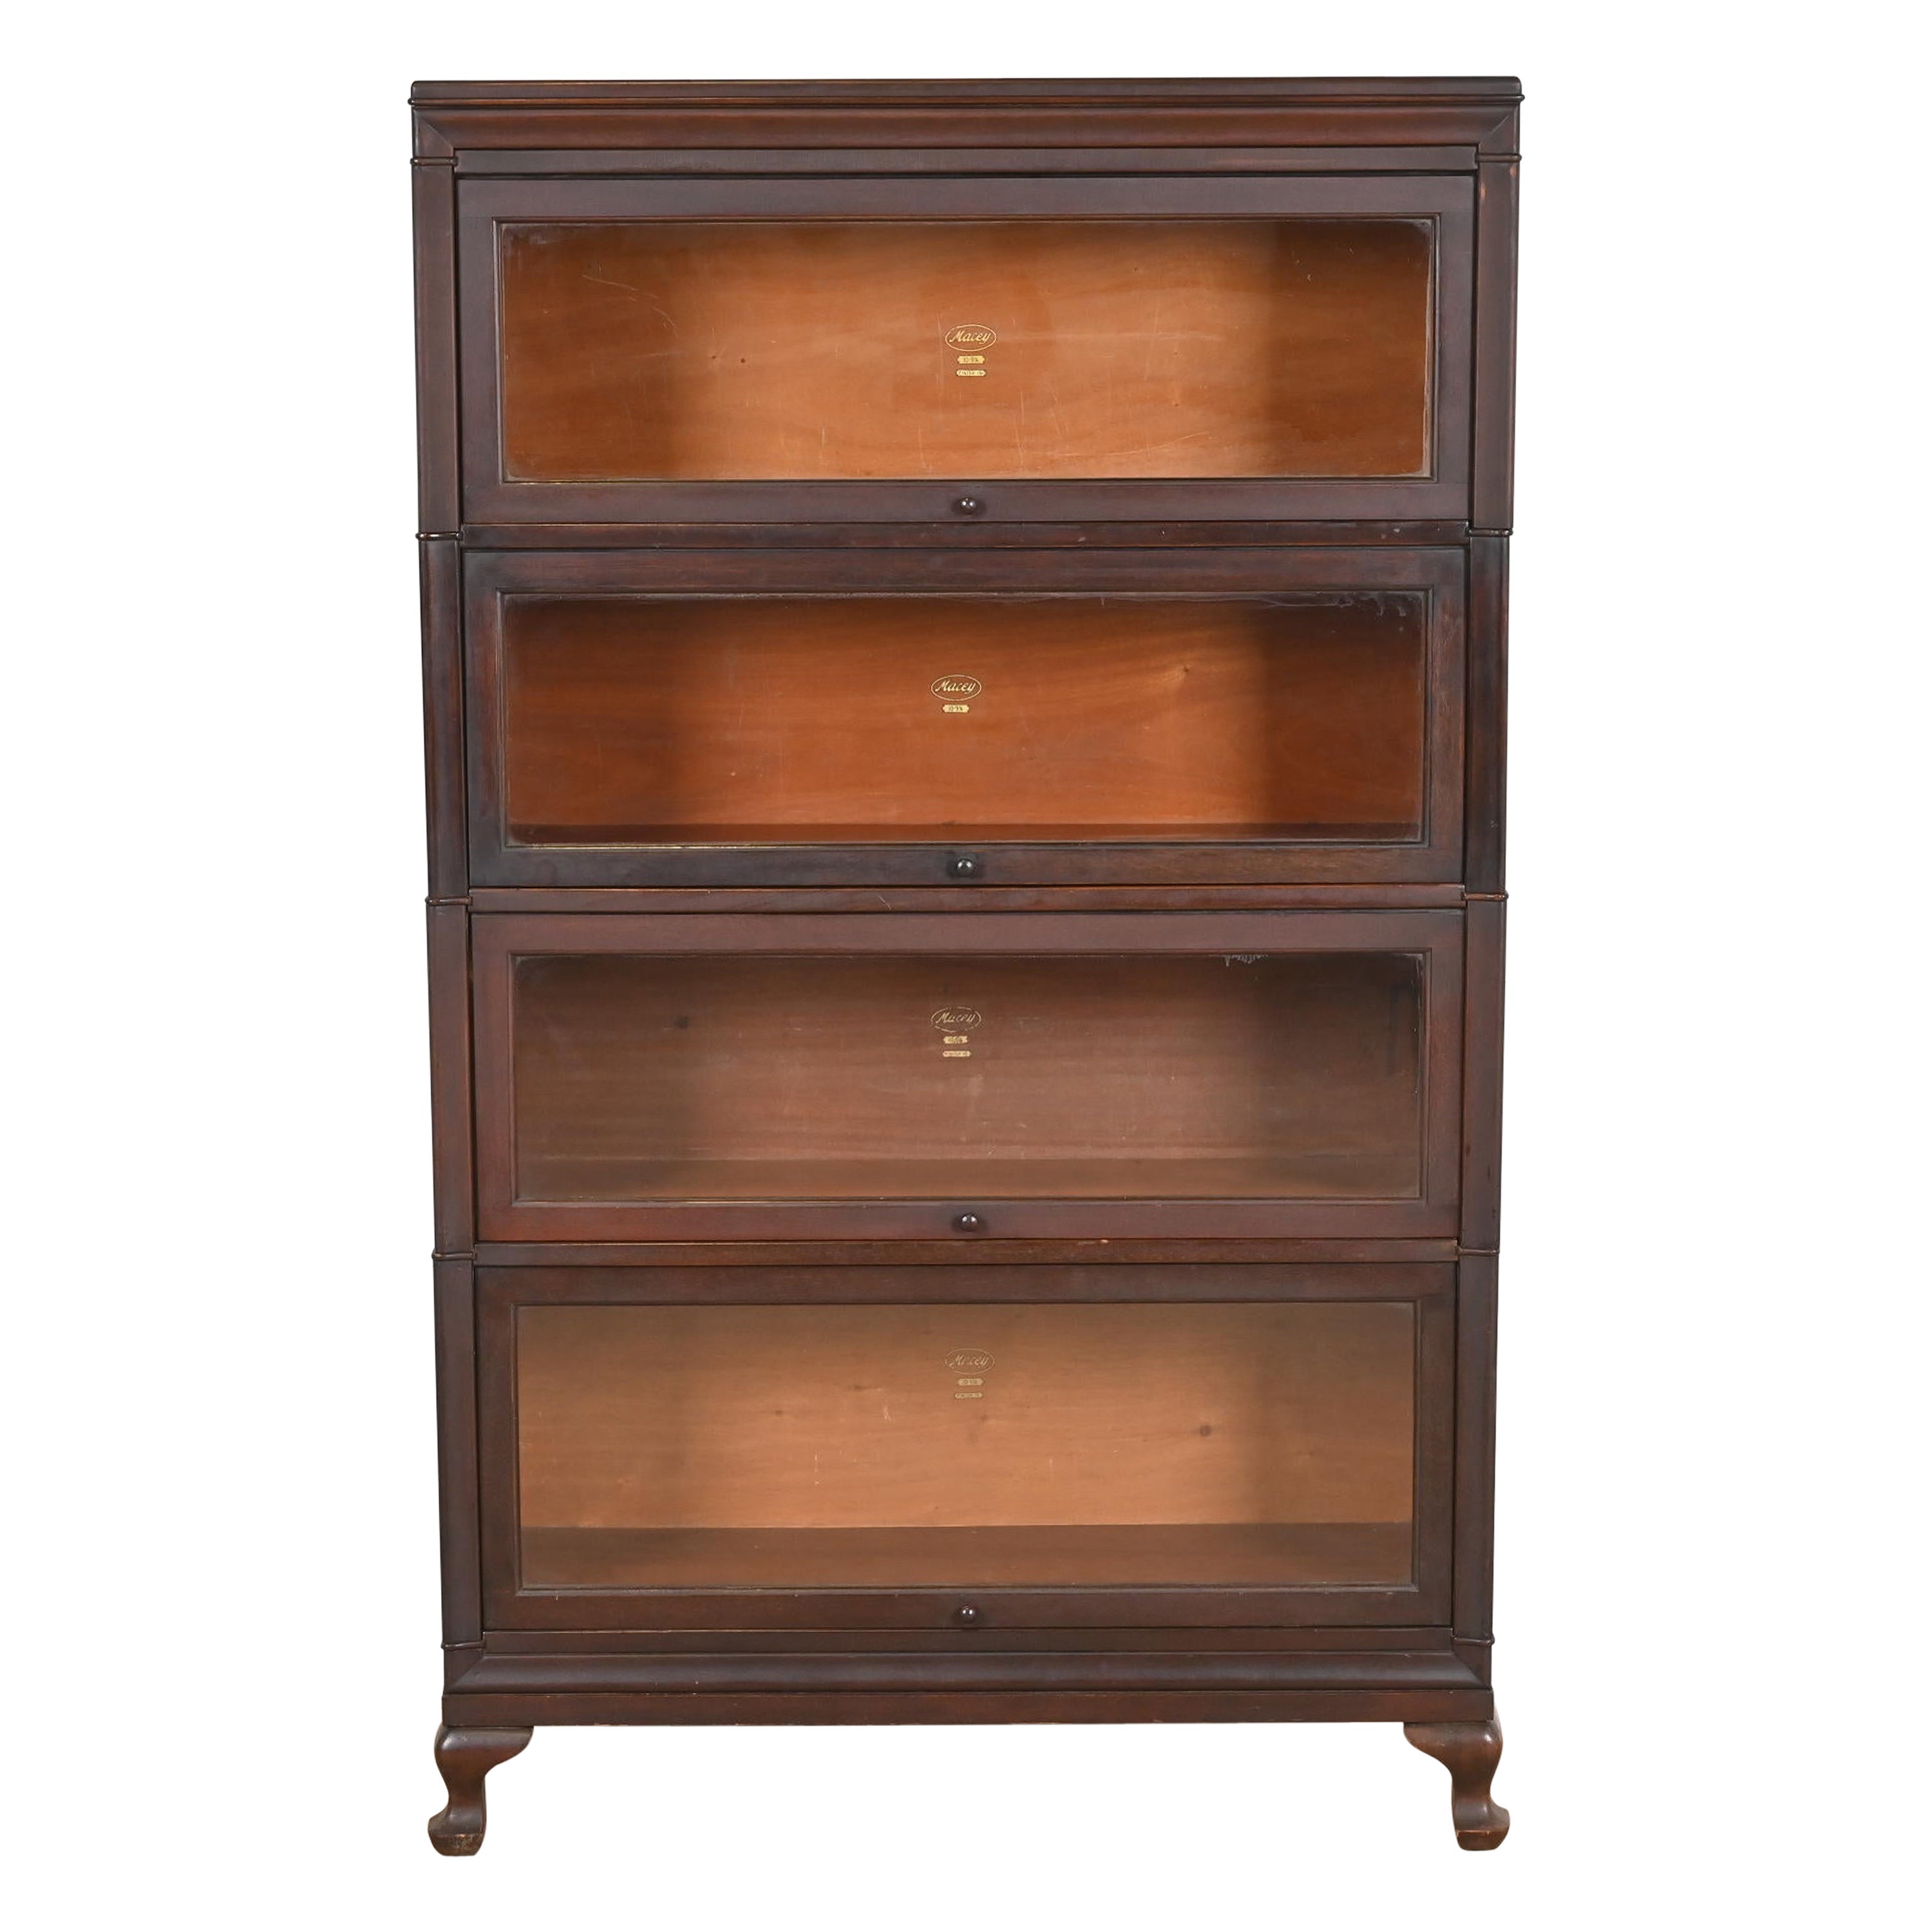 Antique Arts & Crafts Mahogany Four-Stack Barrister Bookcase by Macey, 1920s